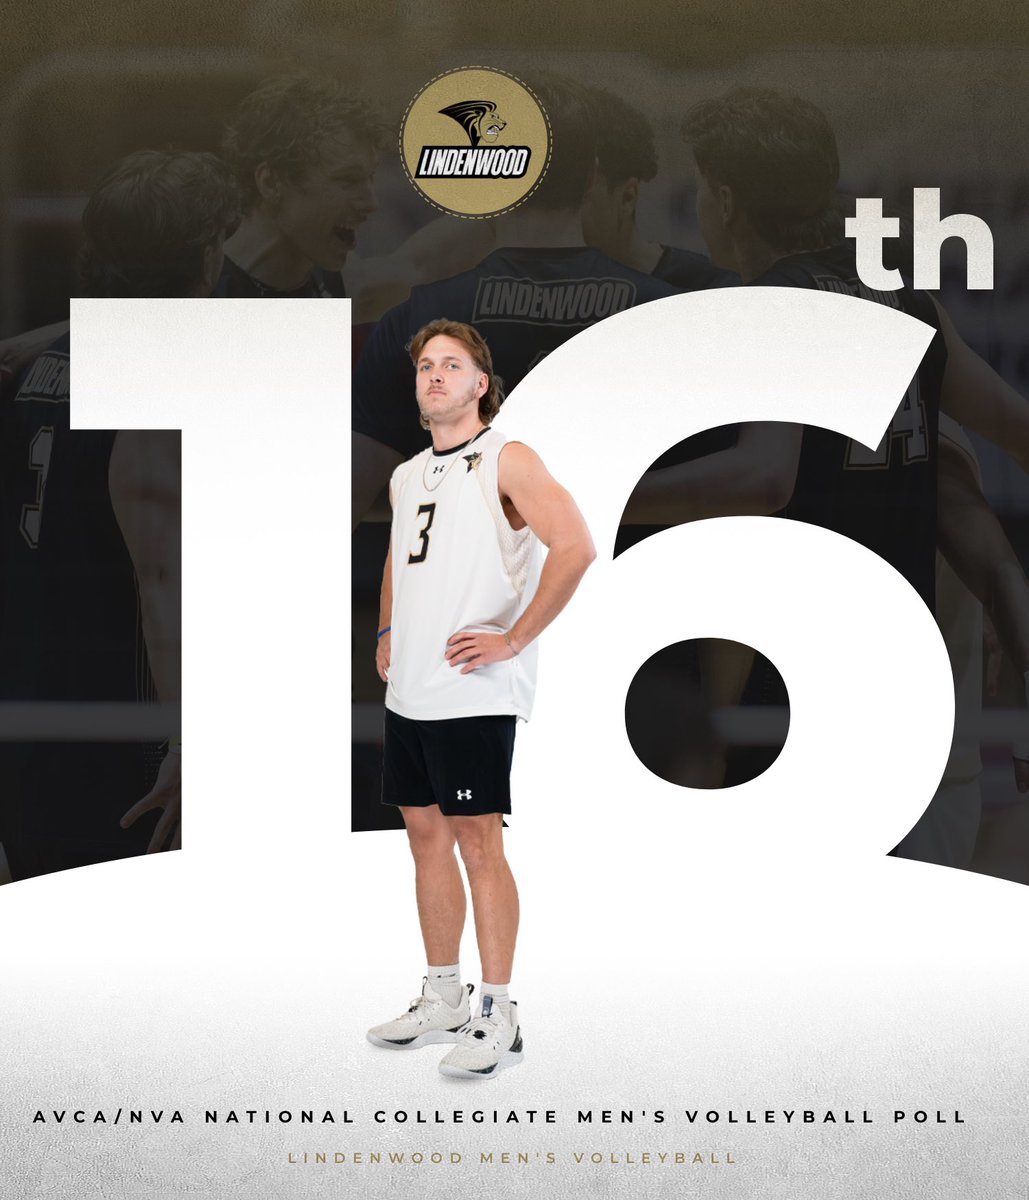 The @lindenwoodMVB 🦁🏐 team comes in at No. 1️⃣6️⃣ in the latest AVCA/NVA Men’s Volleyball Poll

📕 | tinyurl.com/4cbr3x6y

#NewLevel